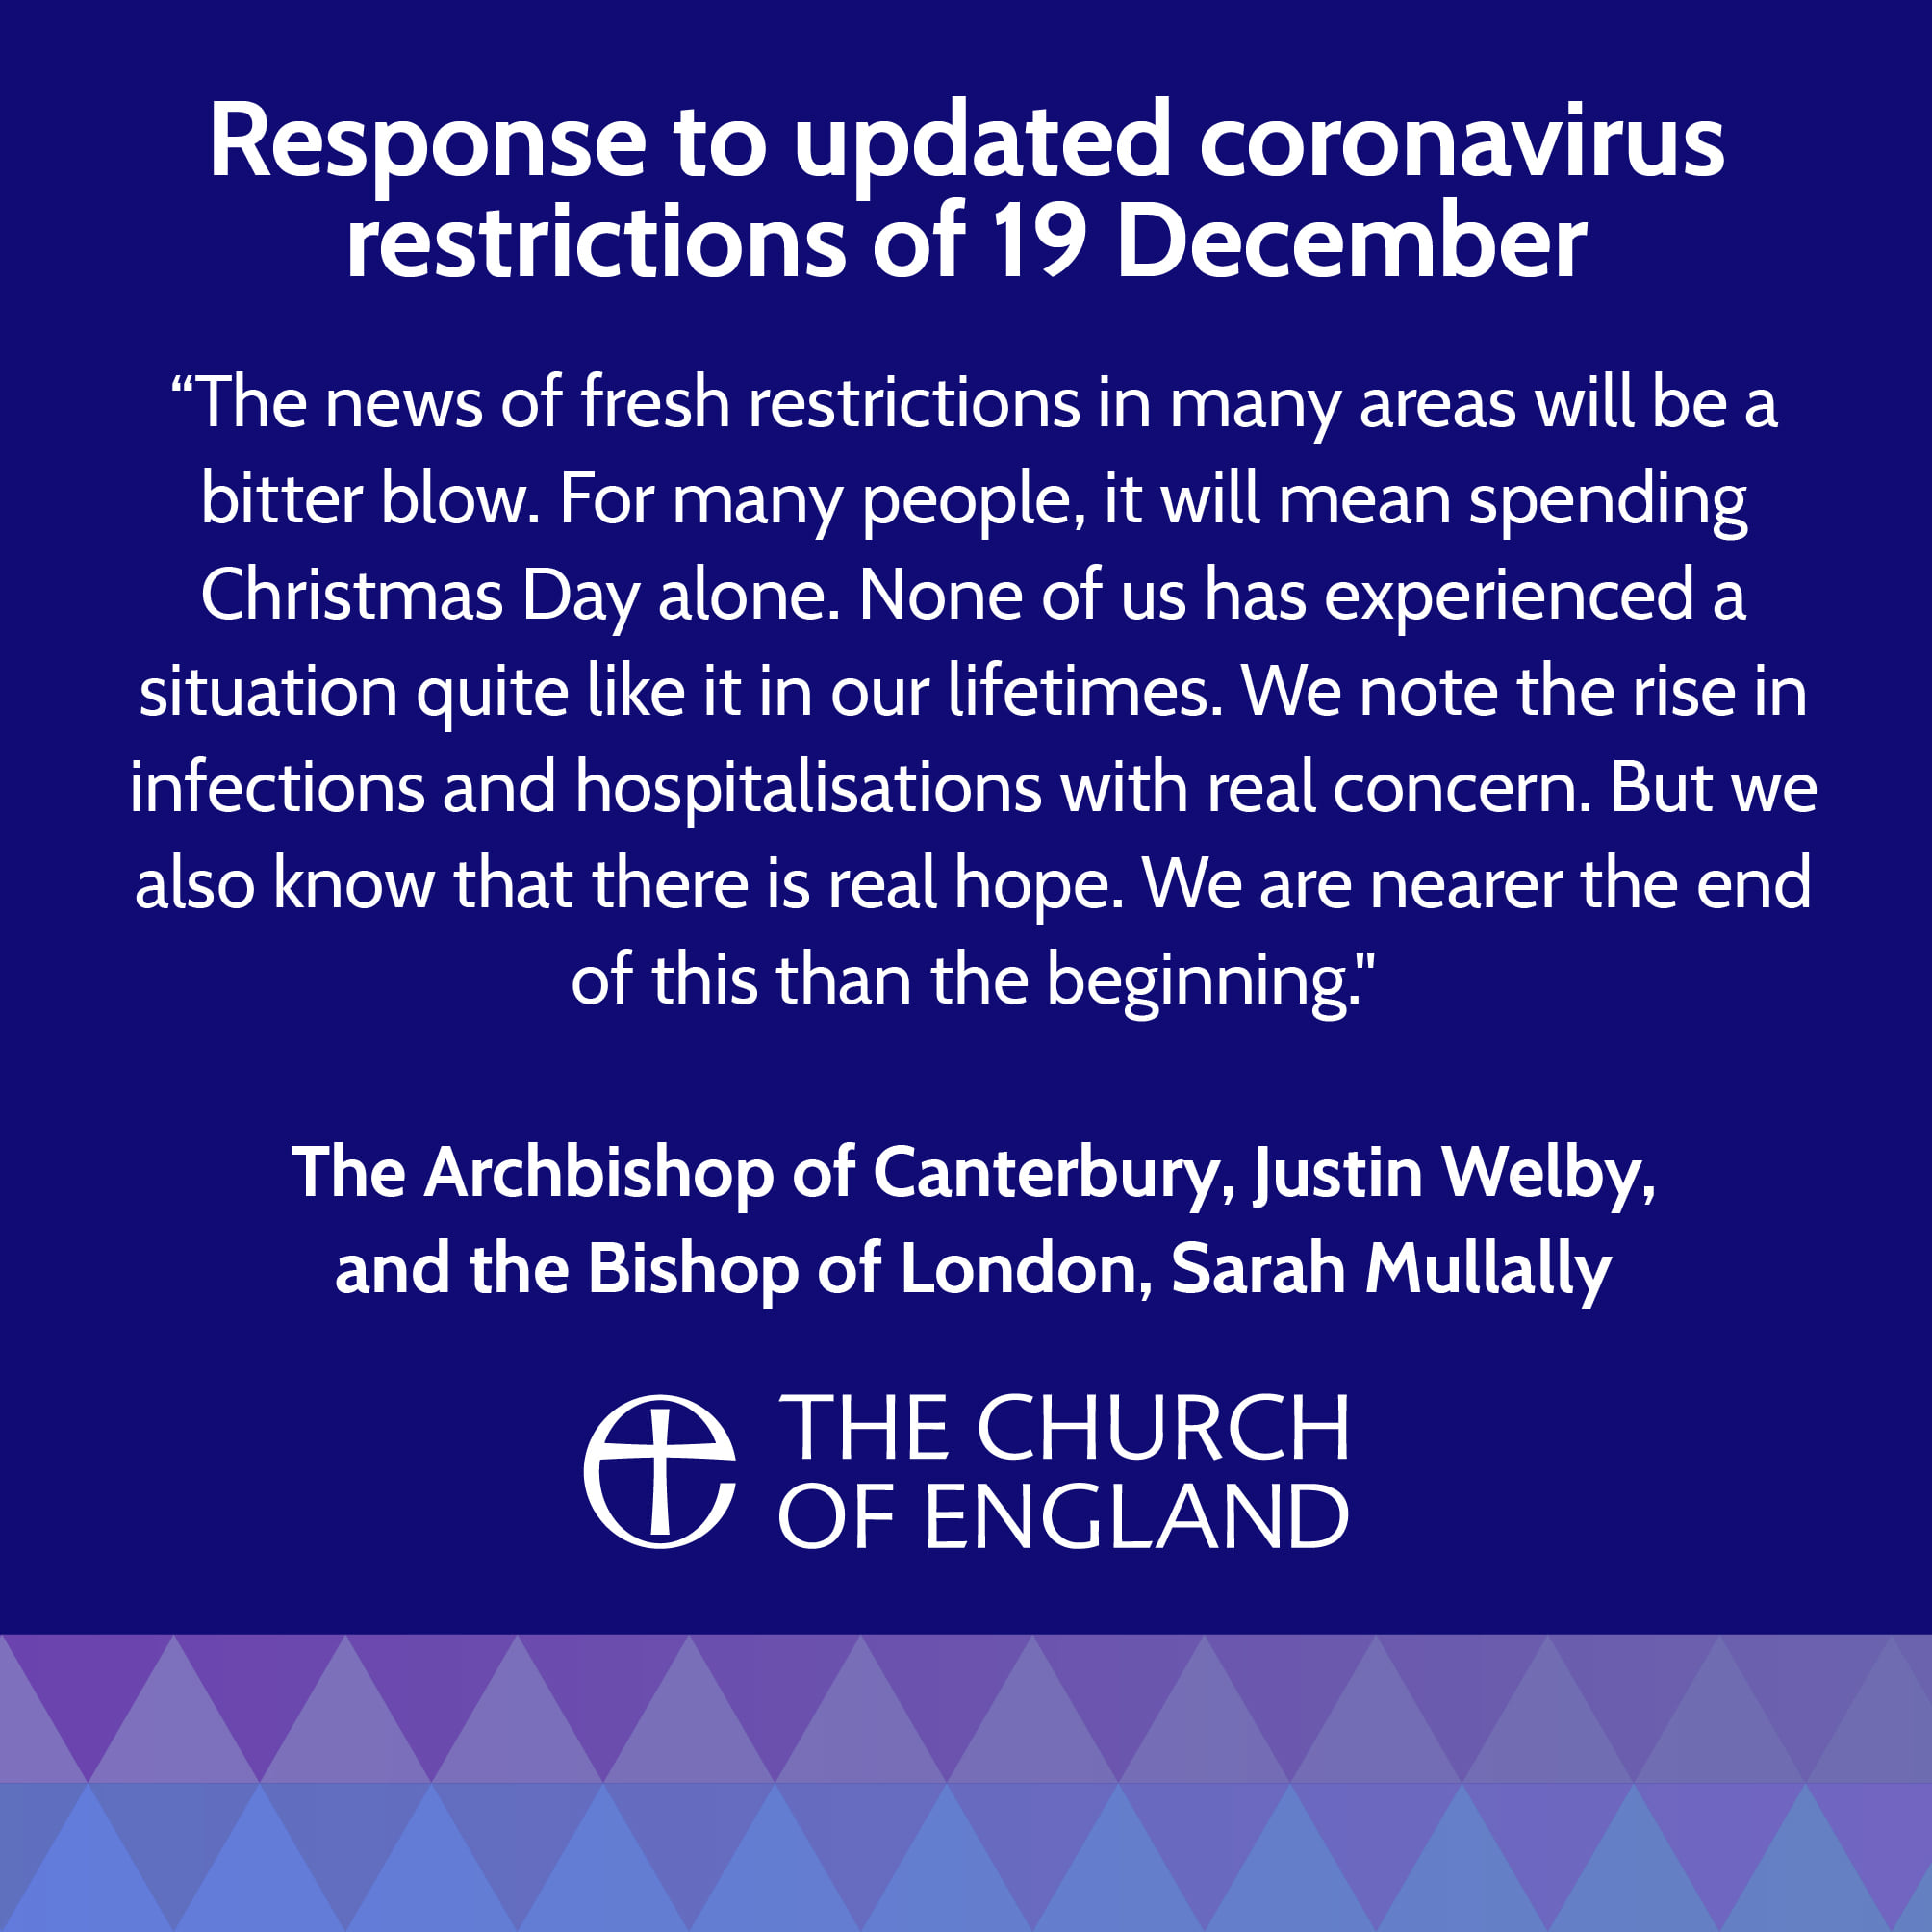 Church of England message from